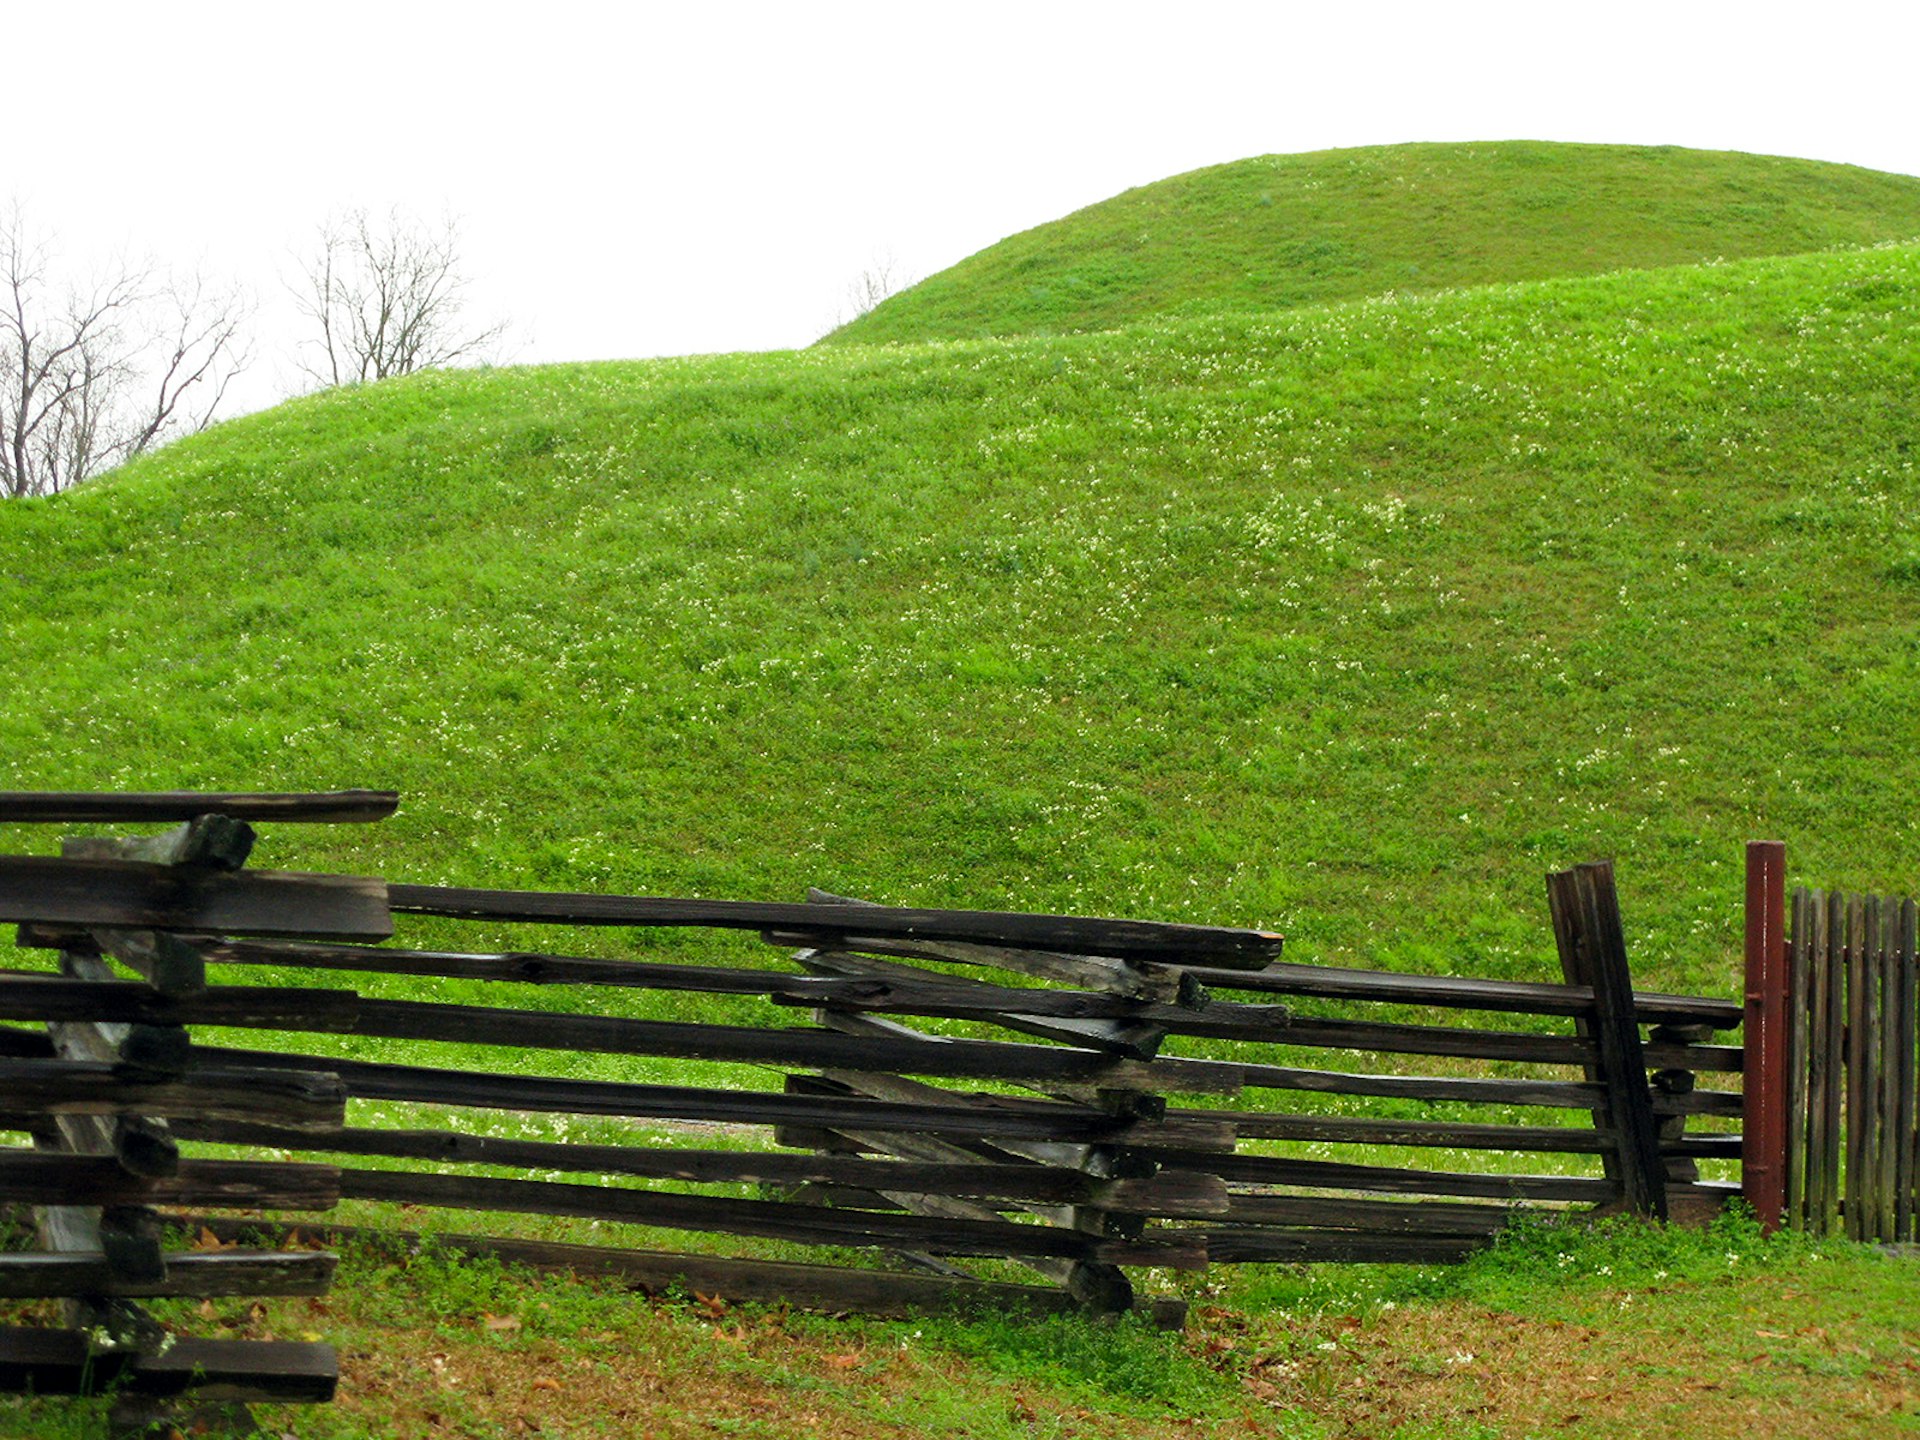 A brown wooden fence sits at the bottom of a towering Native American temple mound, covered in green grass